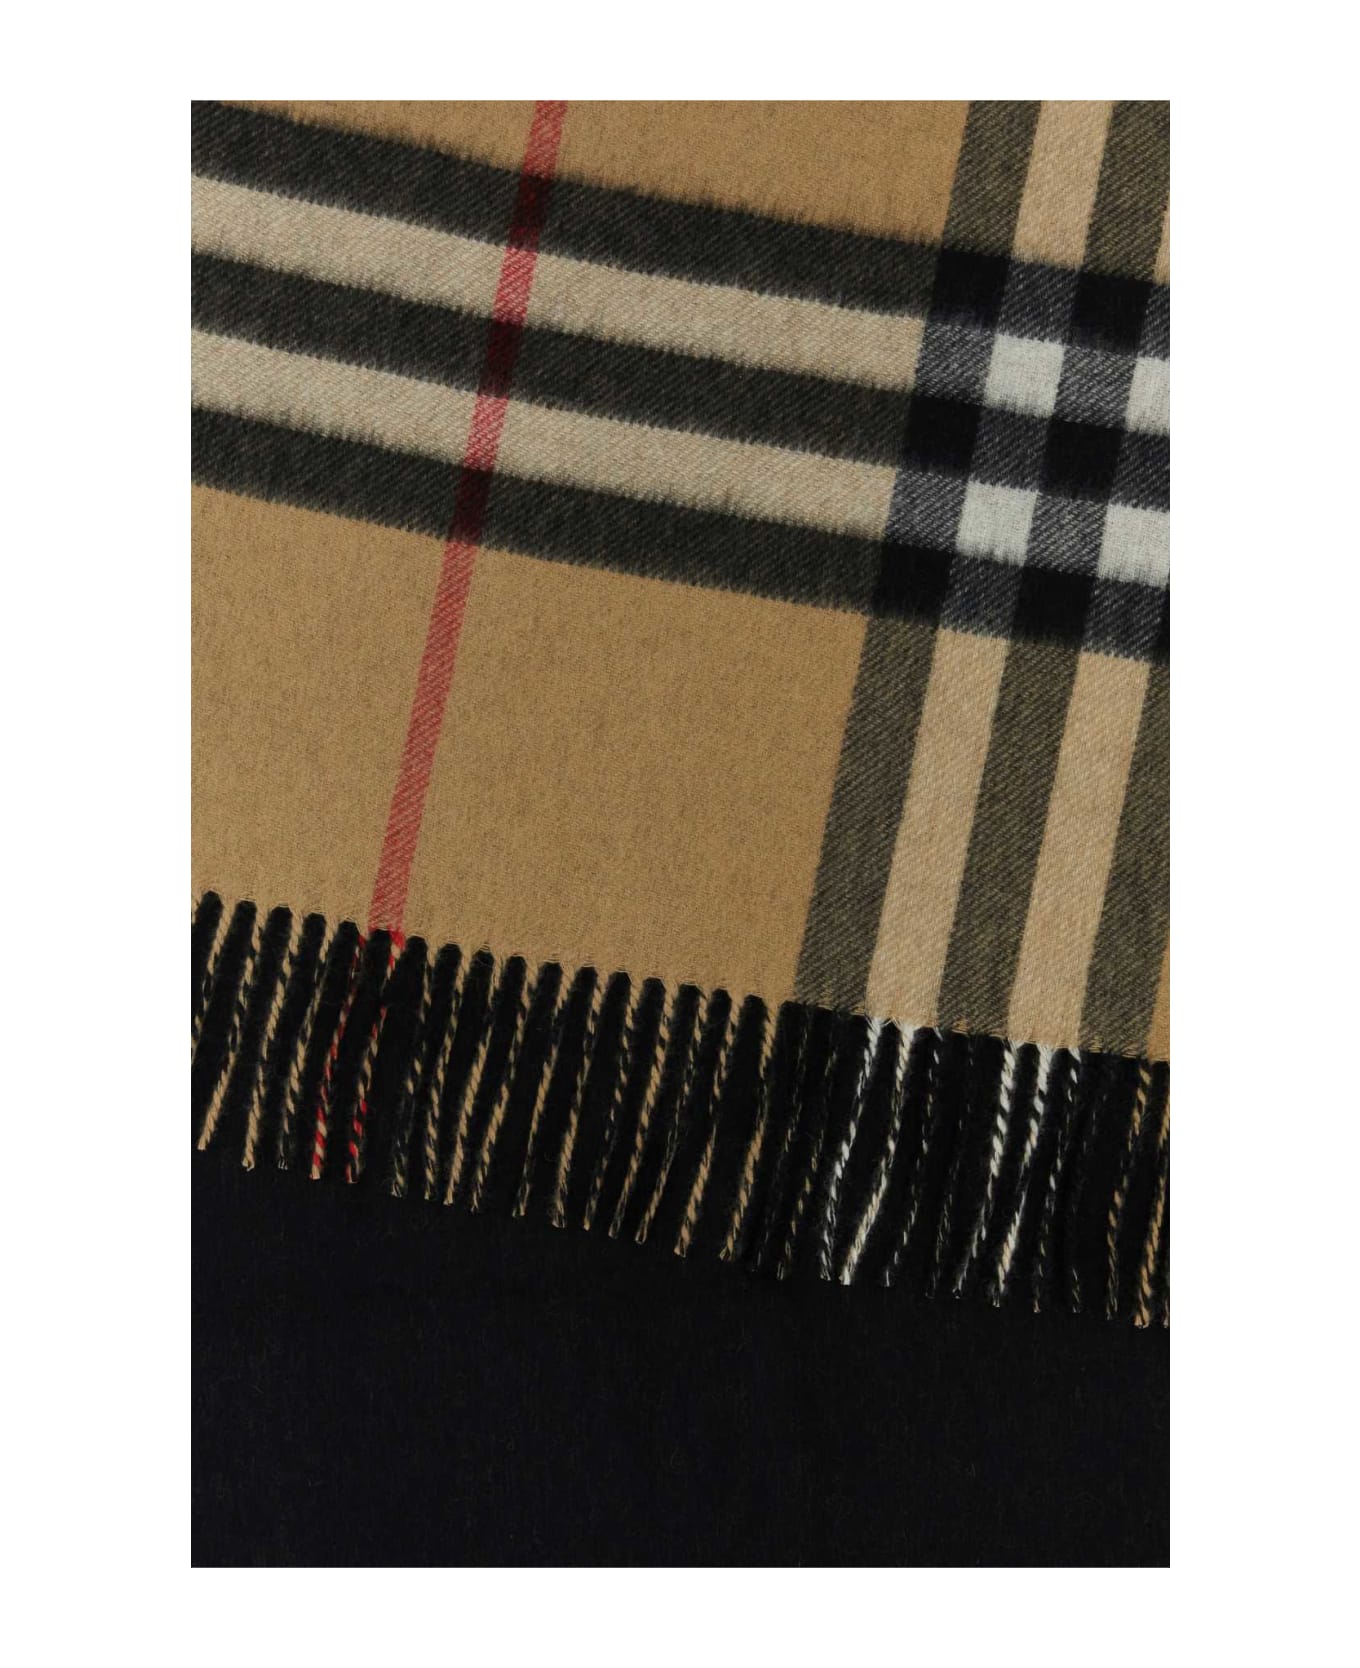 Burberry Embroidered Cashmere Scarf - BLACK